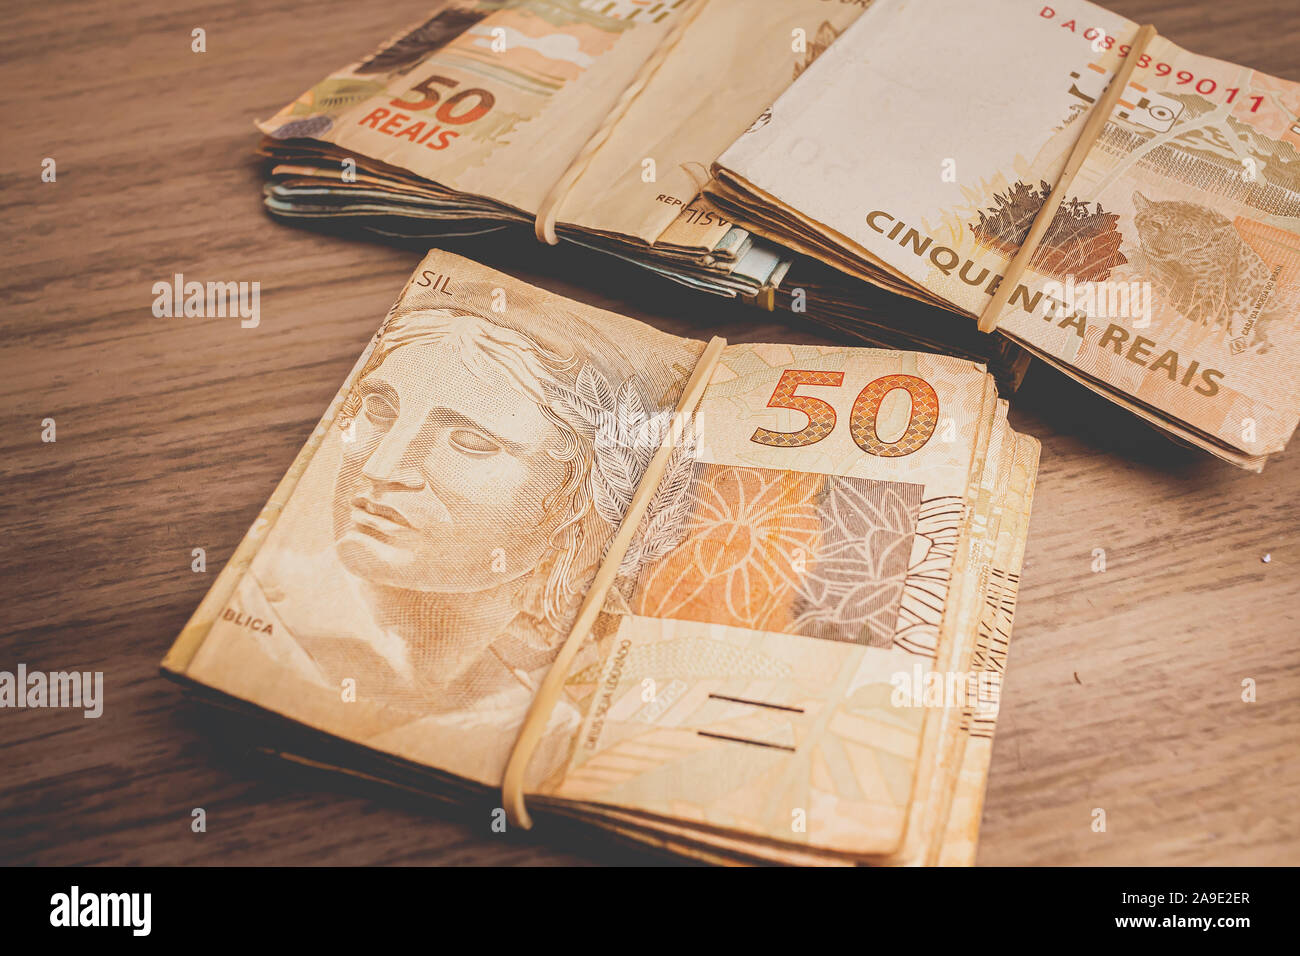 Brazilian Currency. Photo of a group of 50 reais notes on wooden furniture. Stock Photo